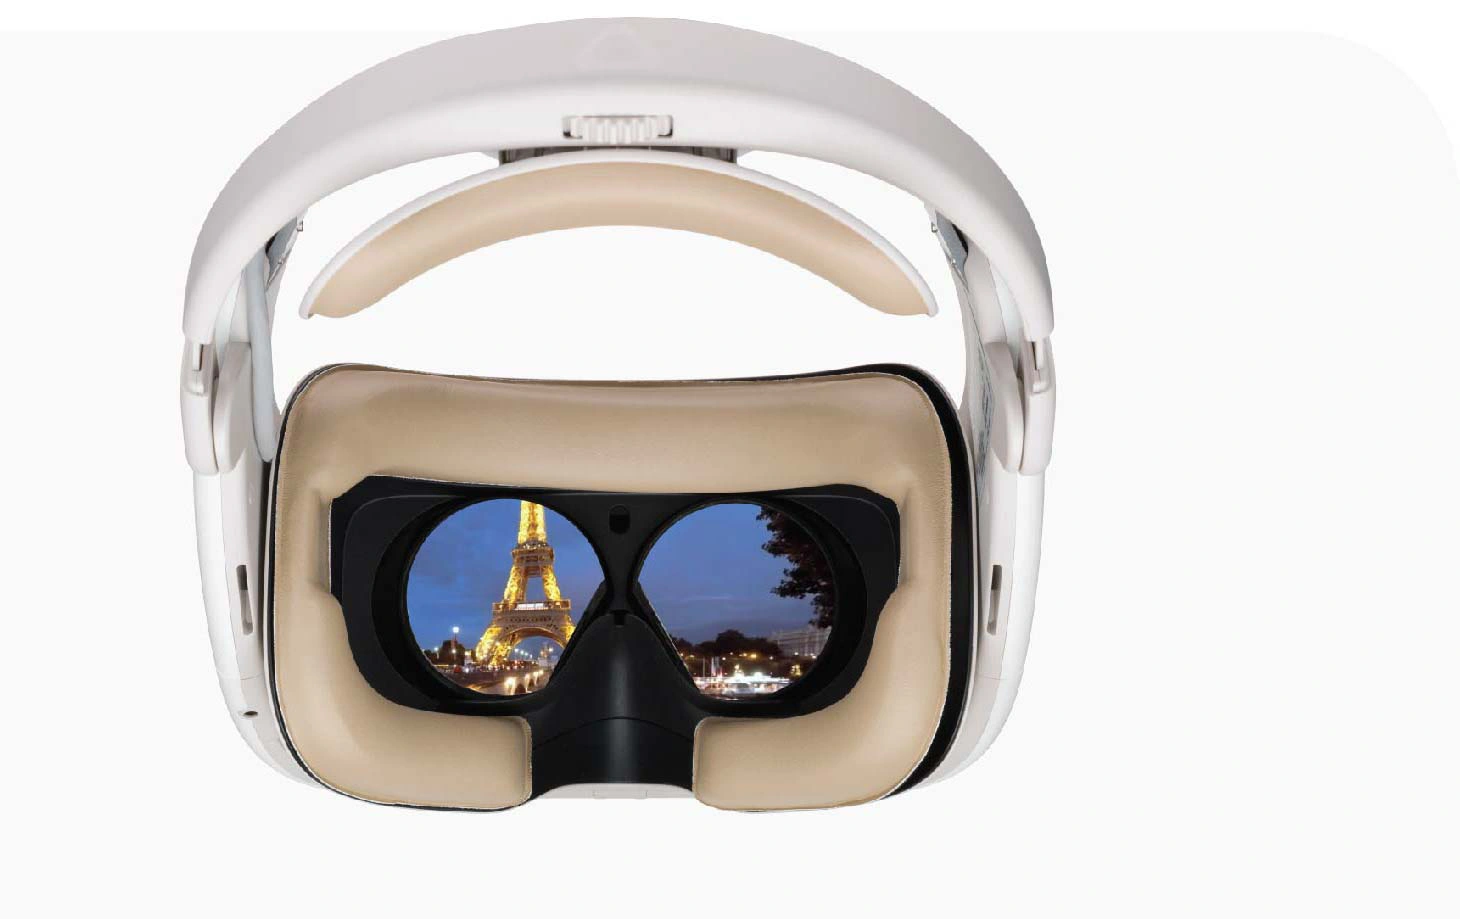 REAL i-Series VR headset with images of Paris, France in the lenses